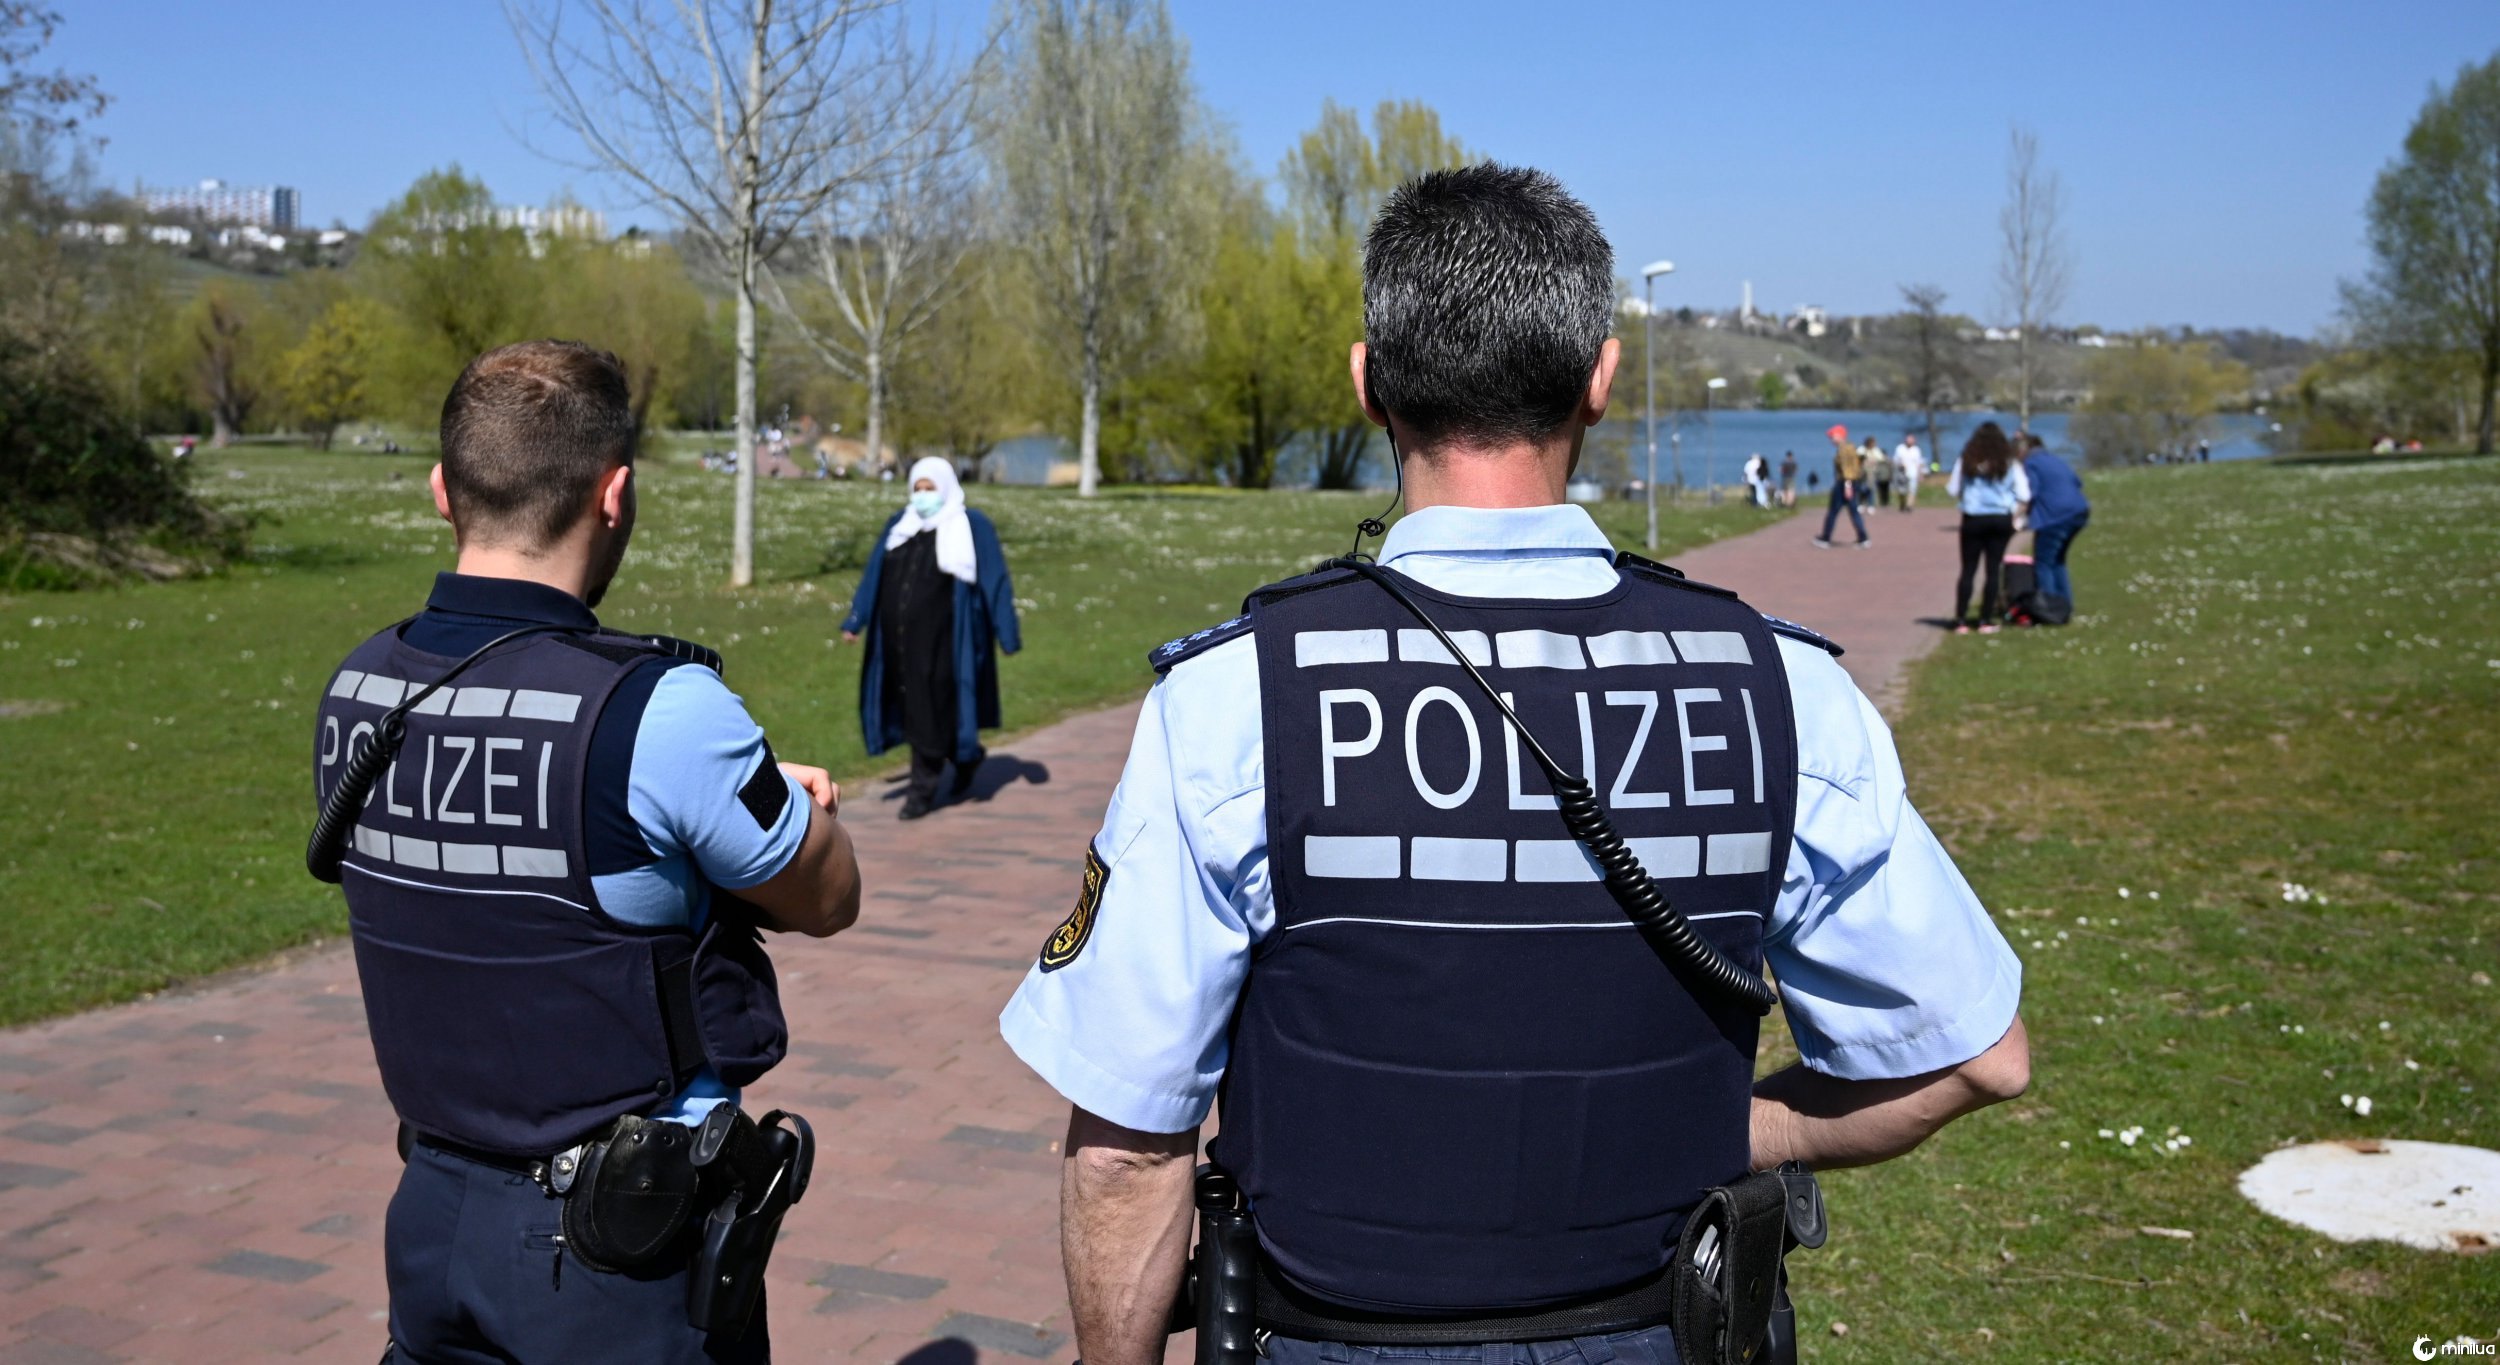 Police officers watch the situation at the lake Max Eyth in Stuttgart, southern Germany, on April 5, 2020, where numerous people enjoy the sunny weather amid the new coronavirus / Covid-19 pandemic. (Photo by THOMAS KIENZLE / AFP) (Photo by THOMAS KIENZLE/AFP via Getty Images)